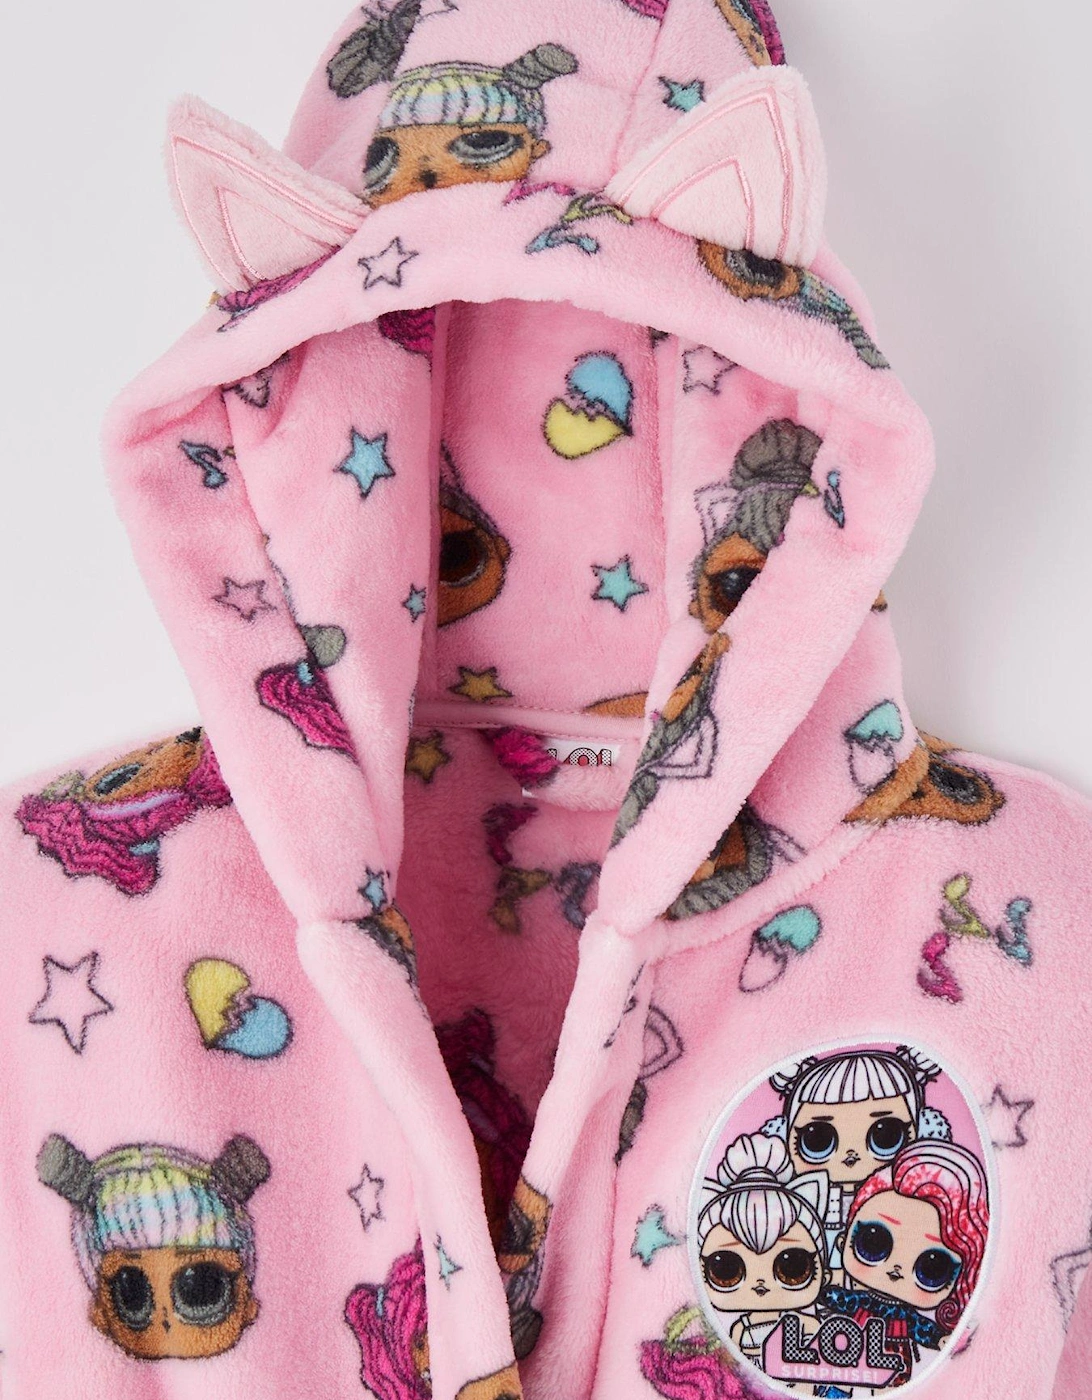 Hood Detail Dressing Gown - Pink